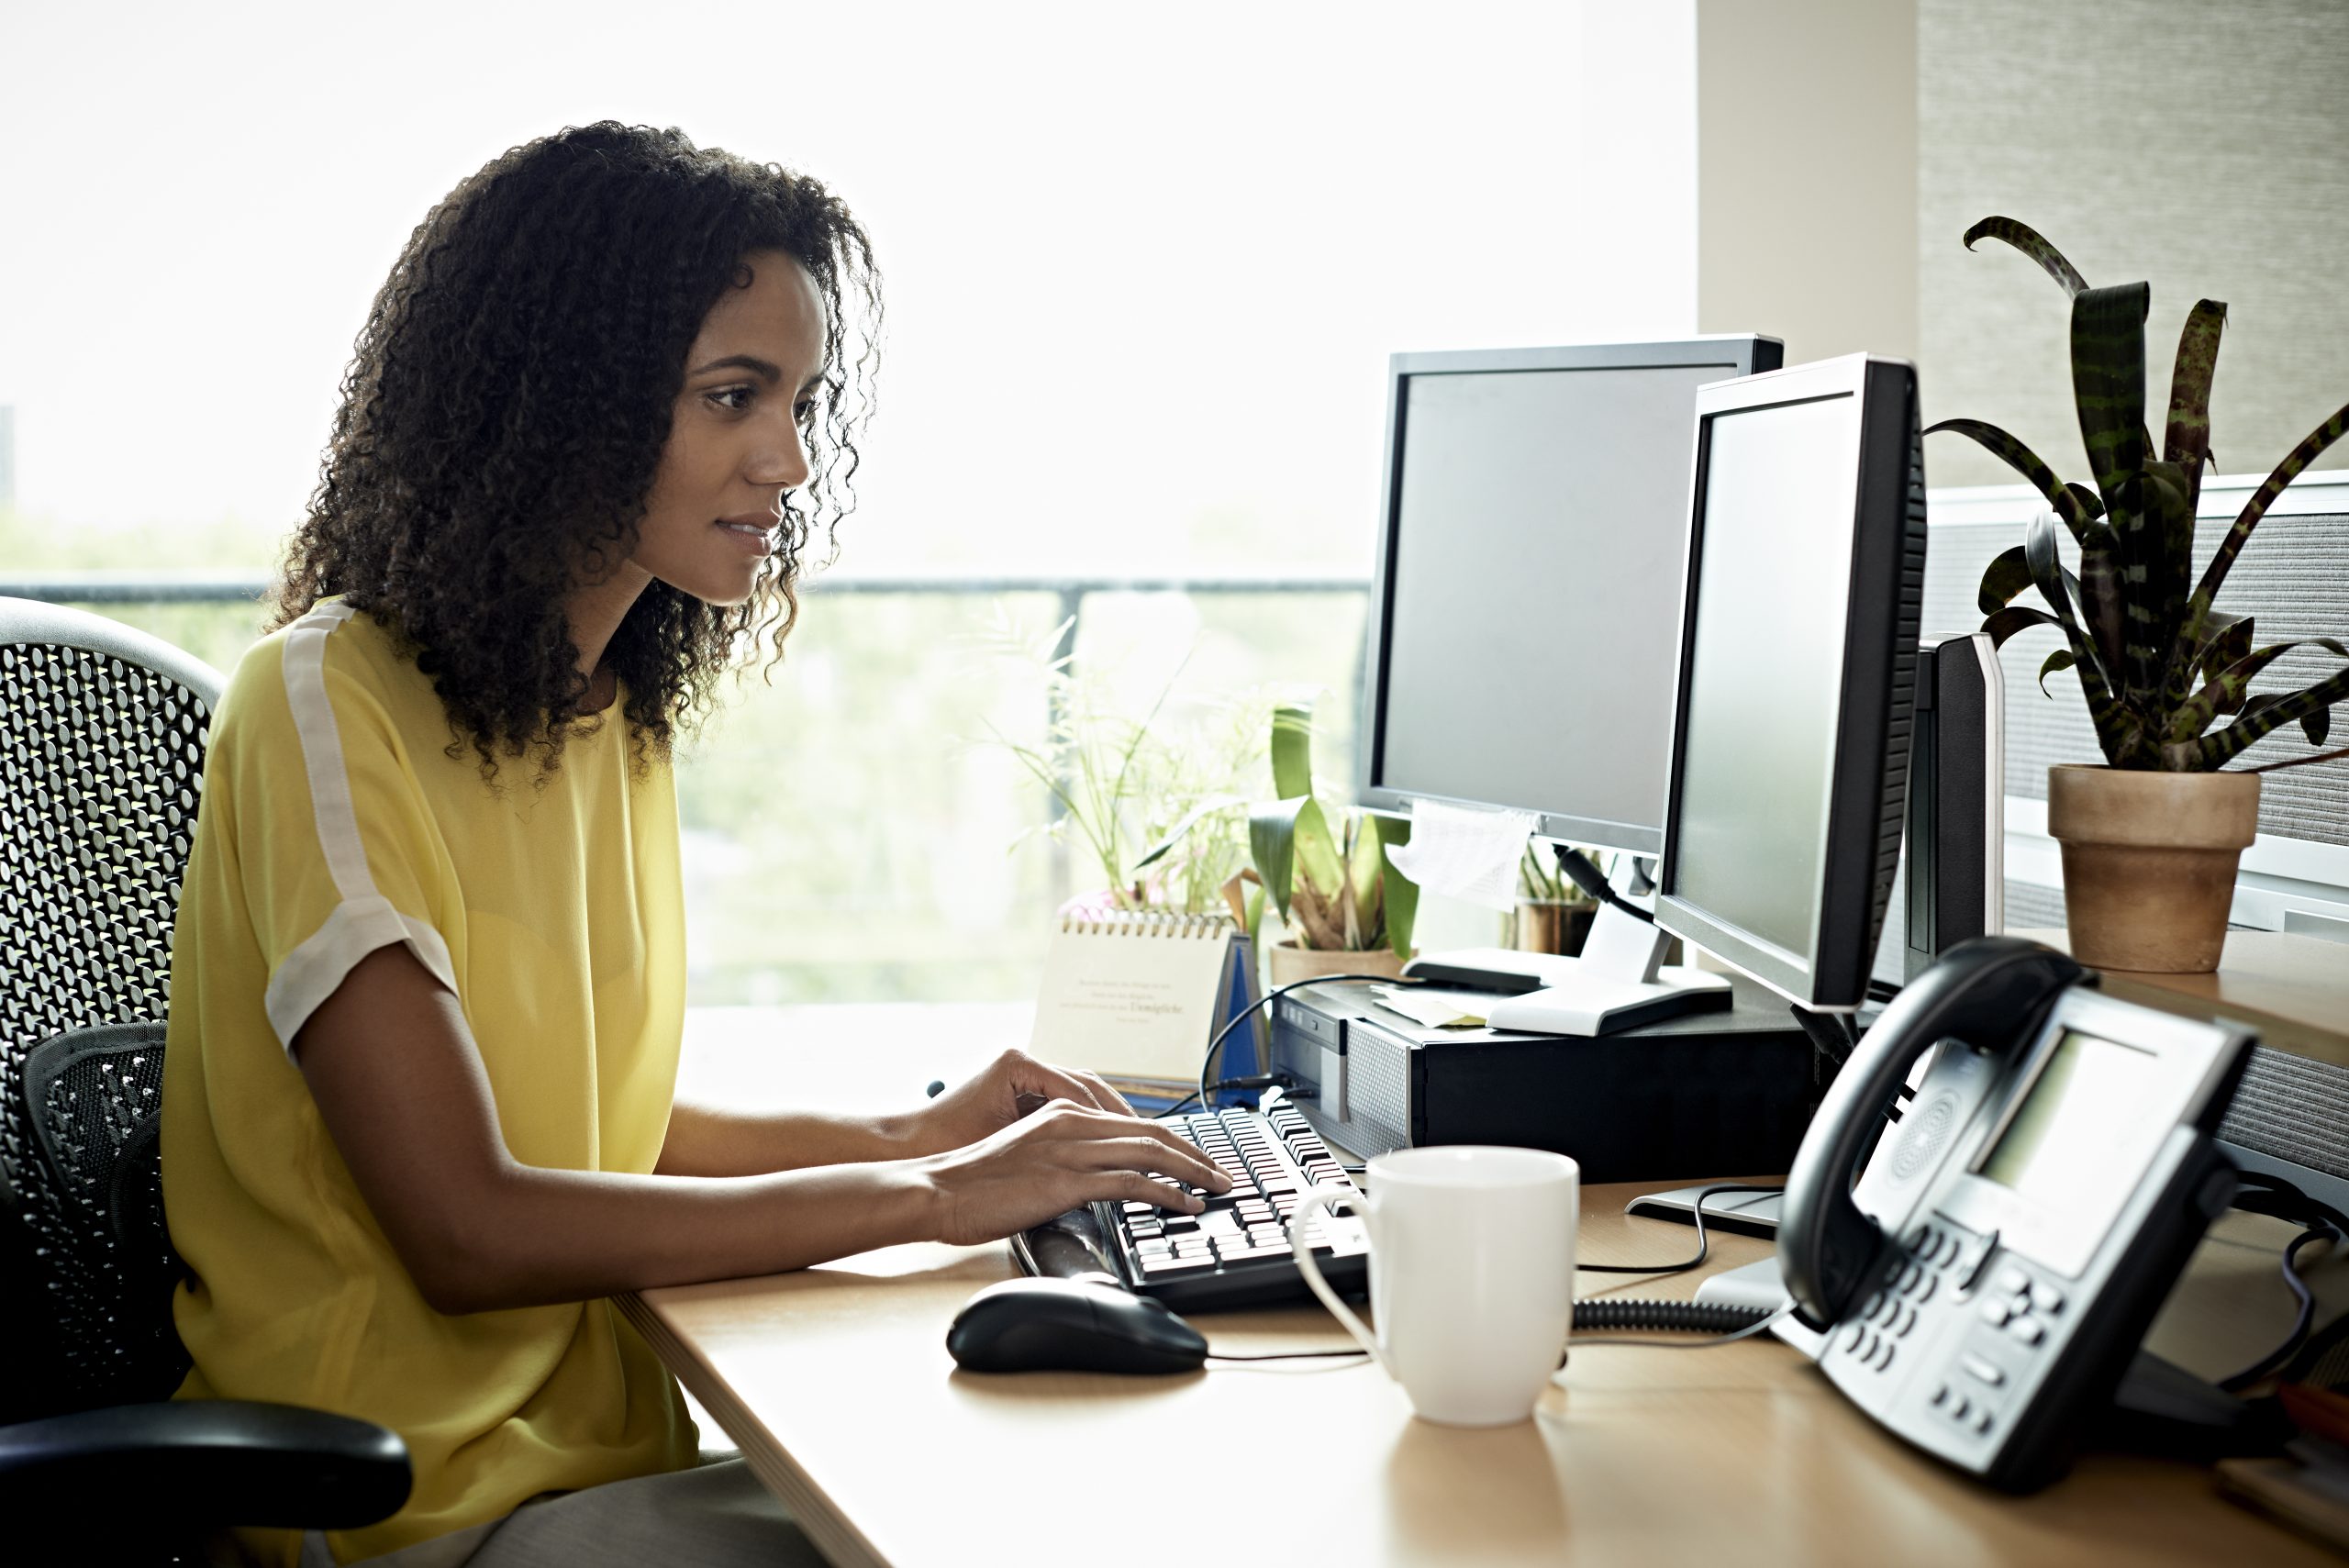 Black woman attentively using a desktop computer in a modern office.